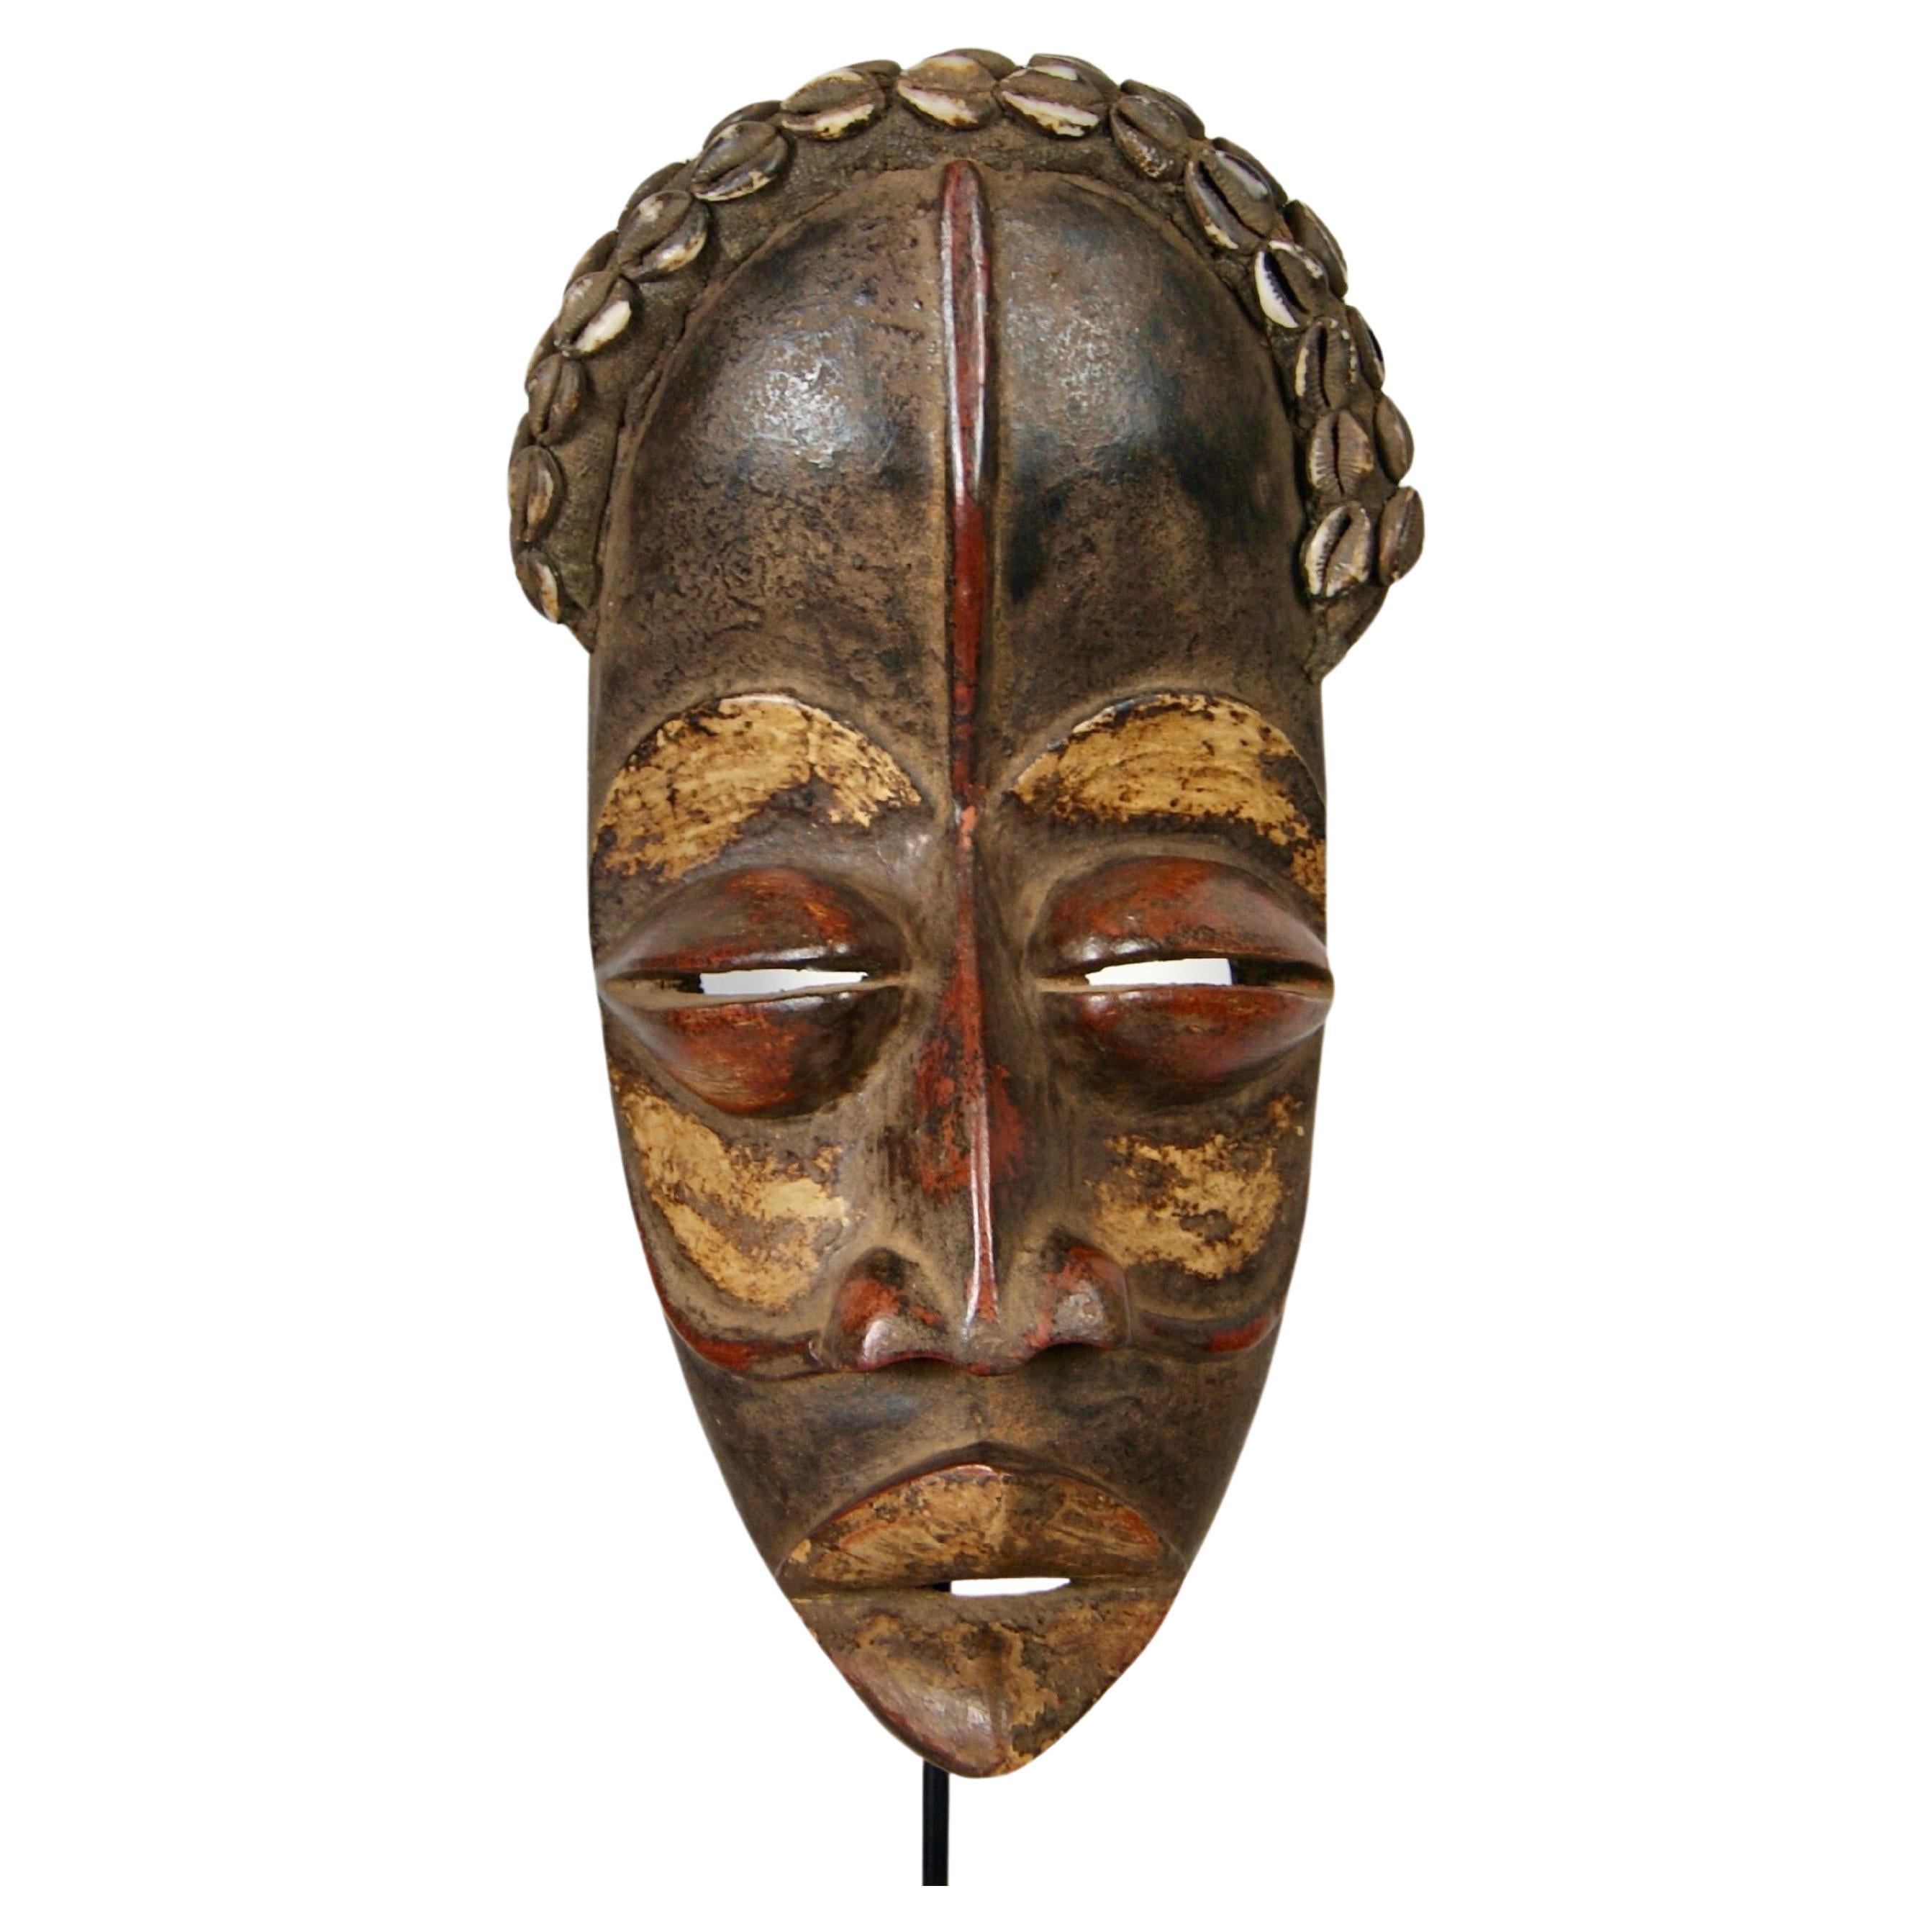 Ancestral Dan Mask 'Deangle' with Cowrie Shells Large